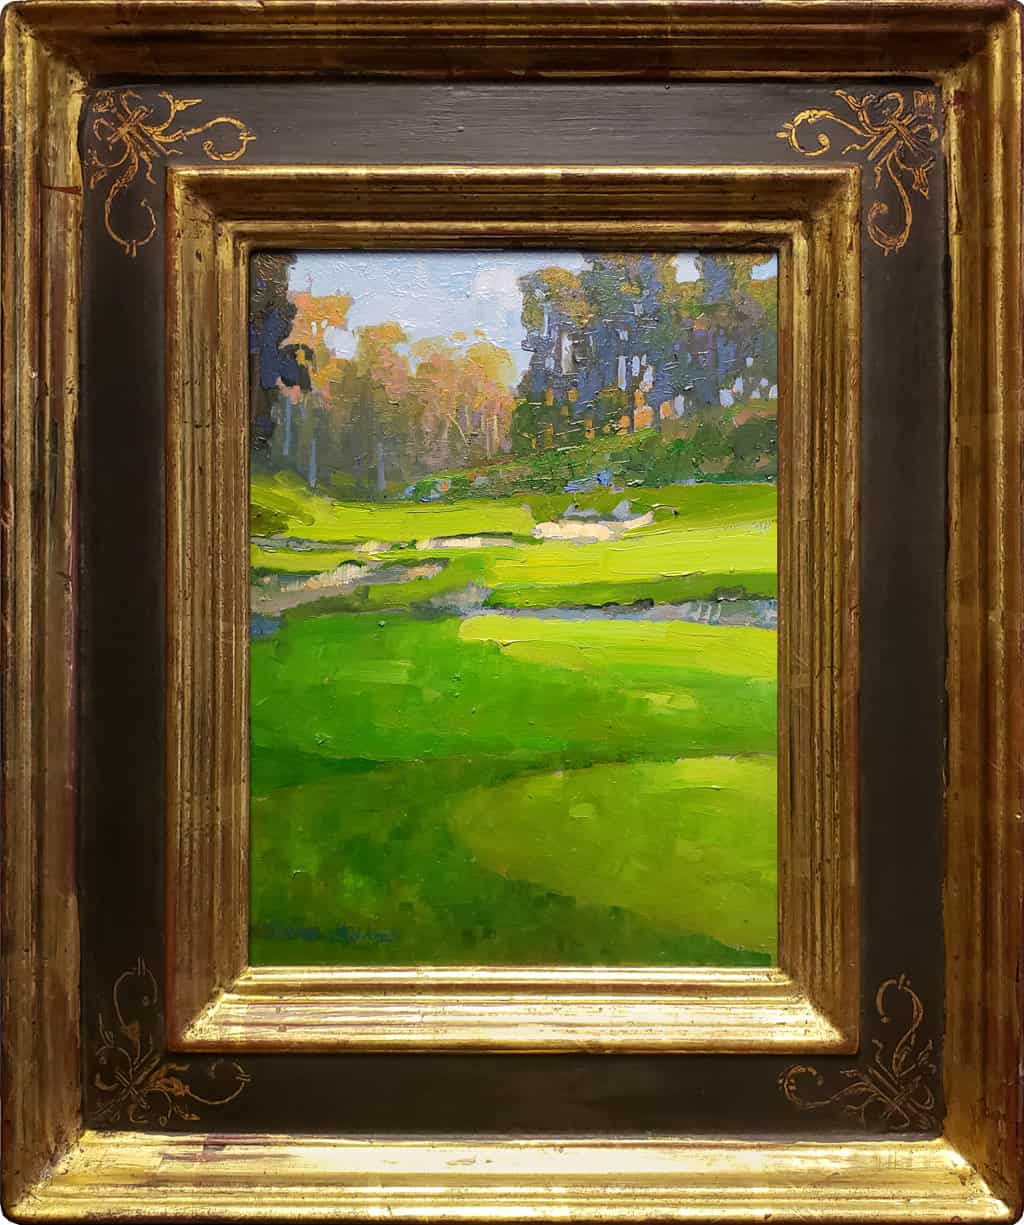 American Legacy Fine Arts presents "Serpentine View" a painting by Peter Adams.